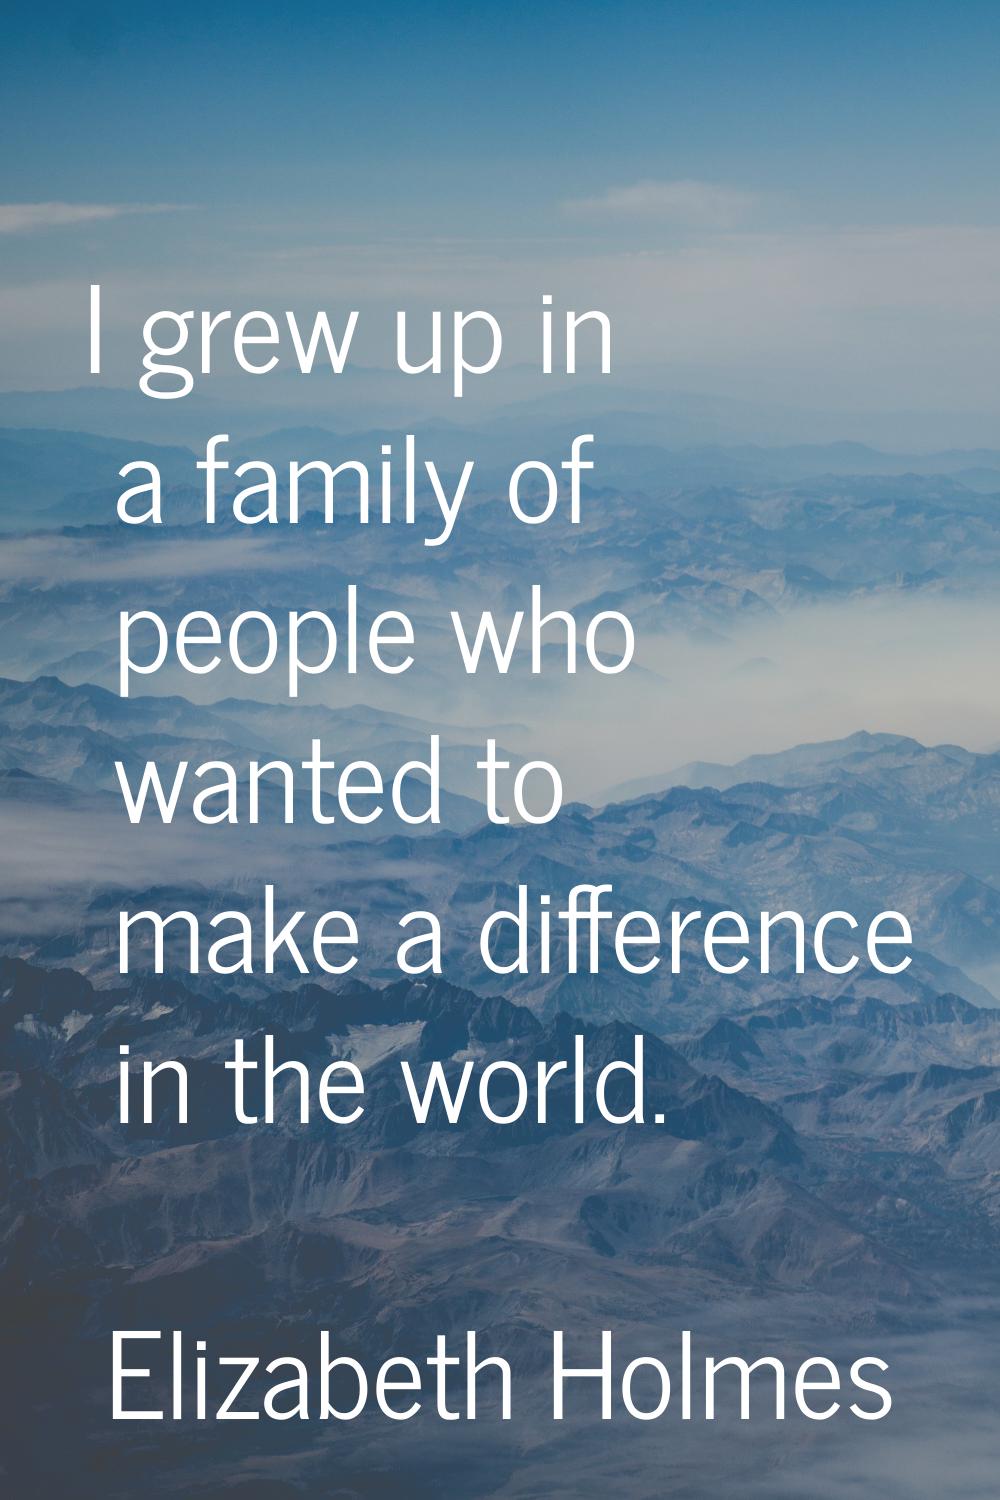 I grew up in a family of people who wanted to make a difference in the world.